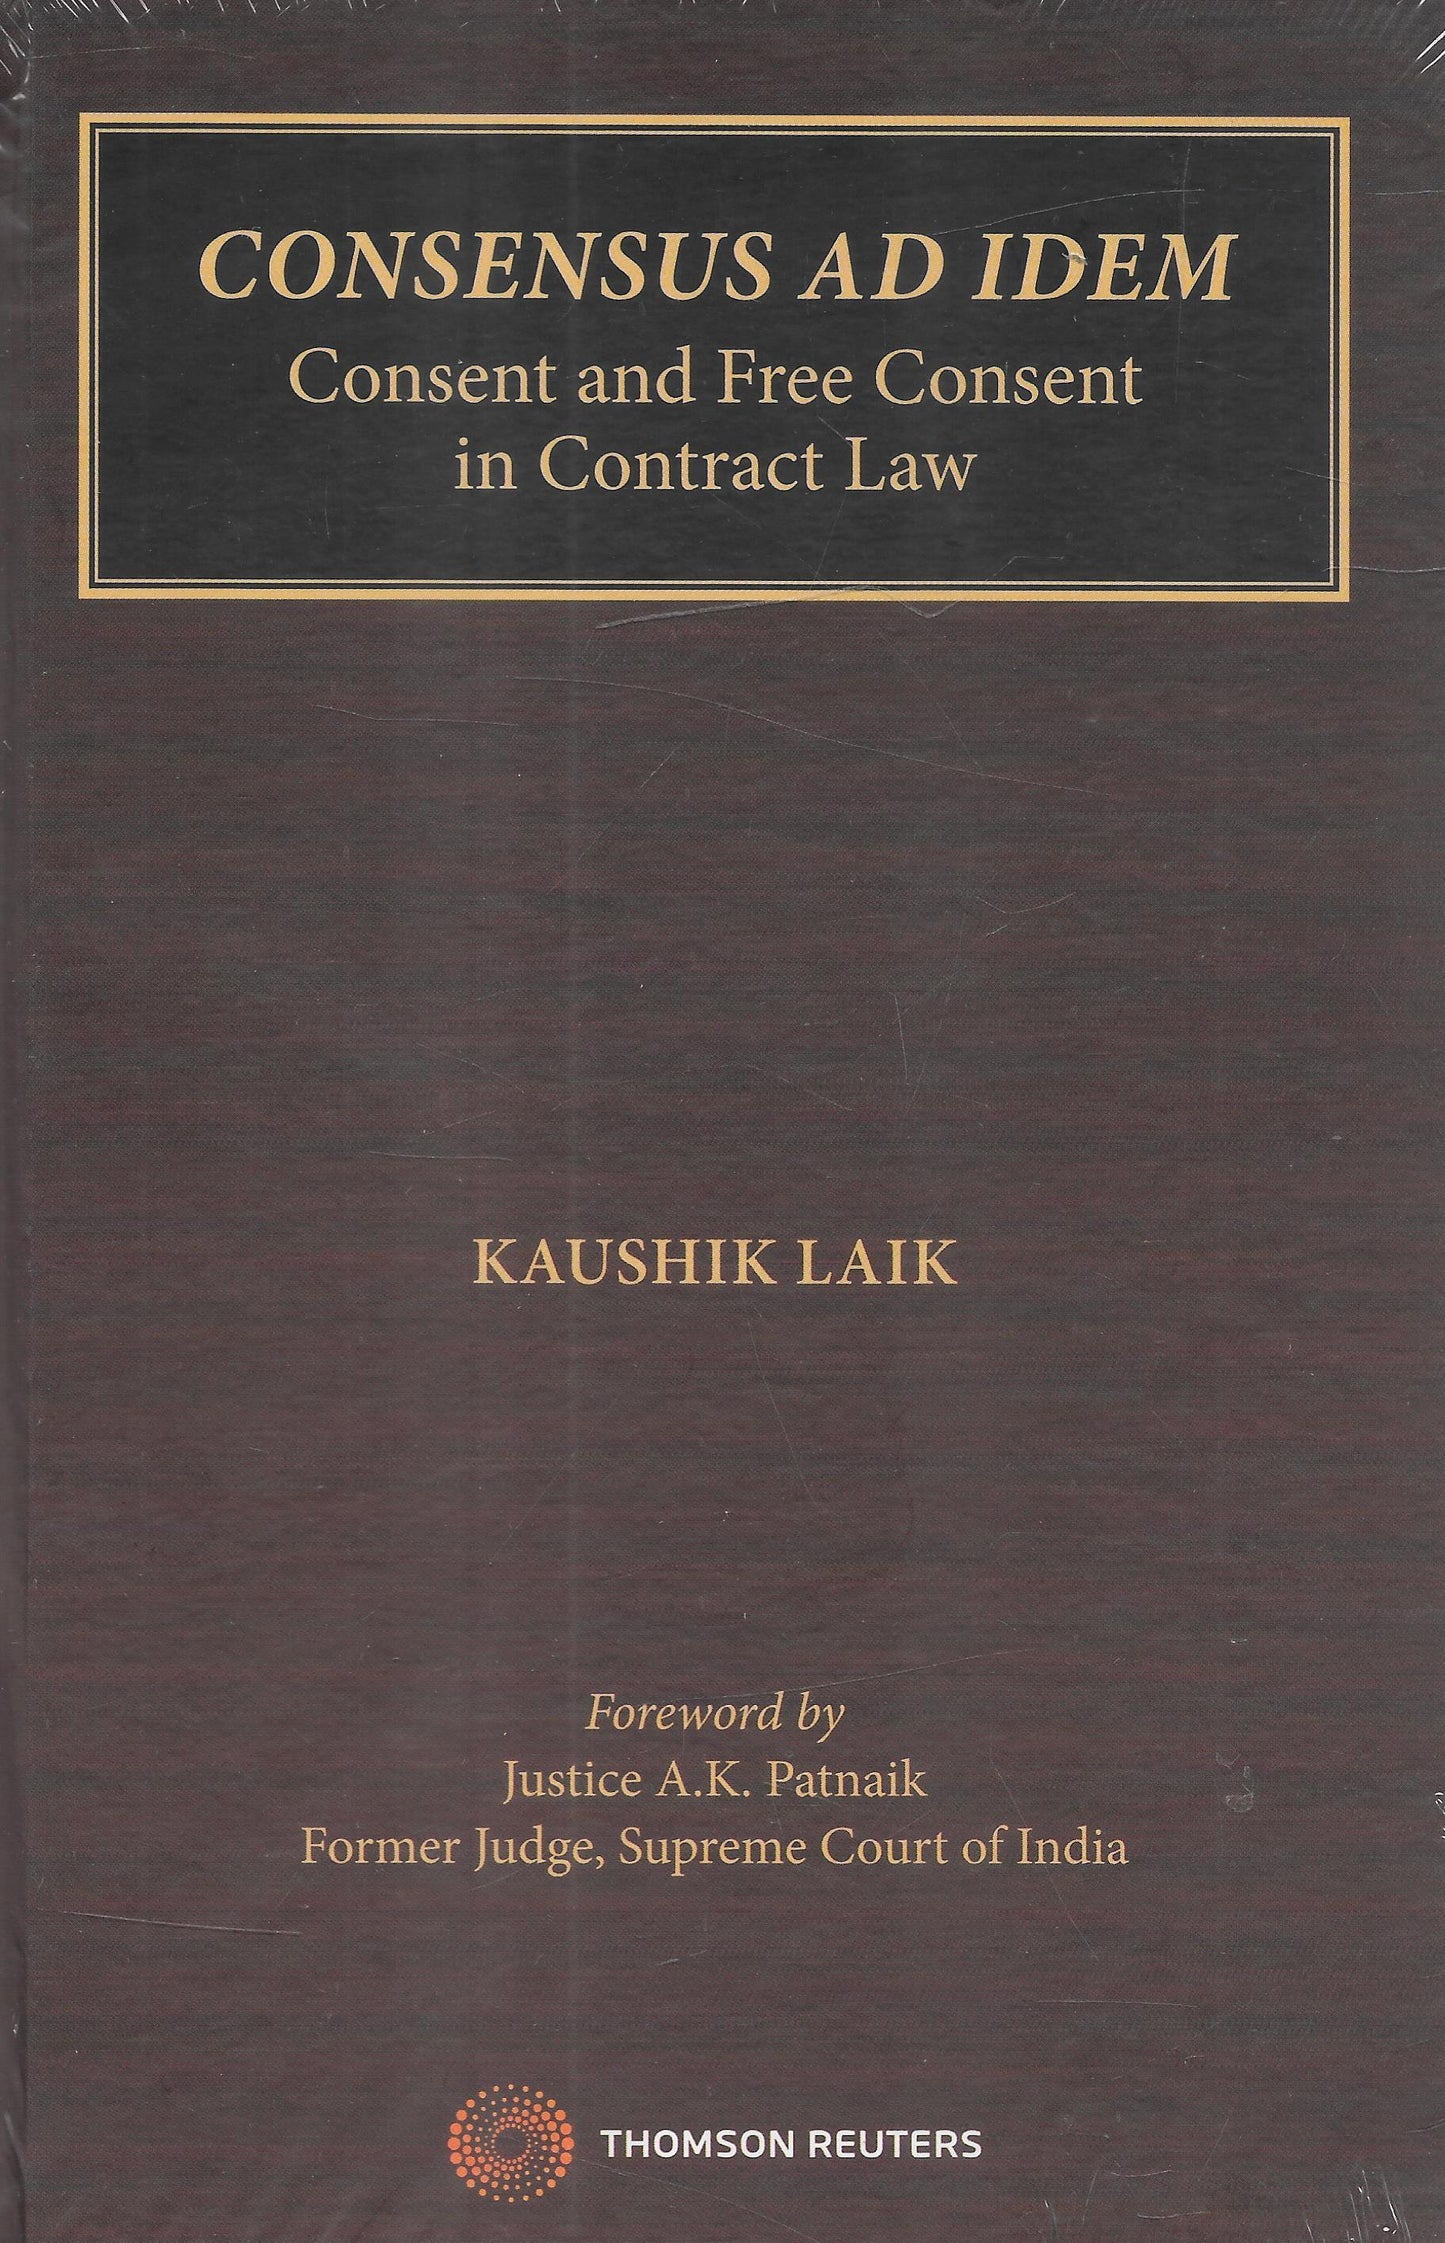 Consensus Ad Idem - Consent and Free Consent in Contract Law